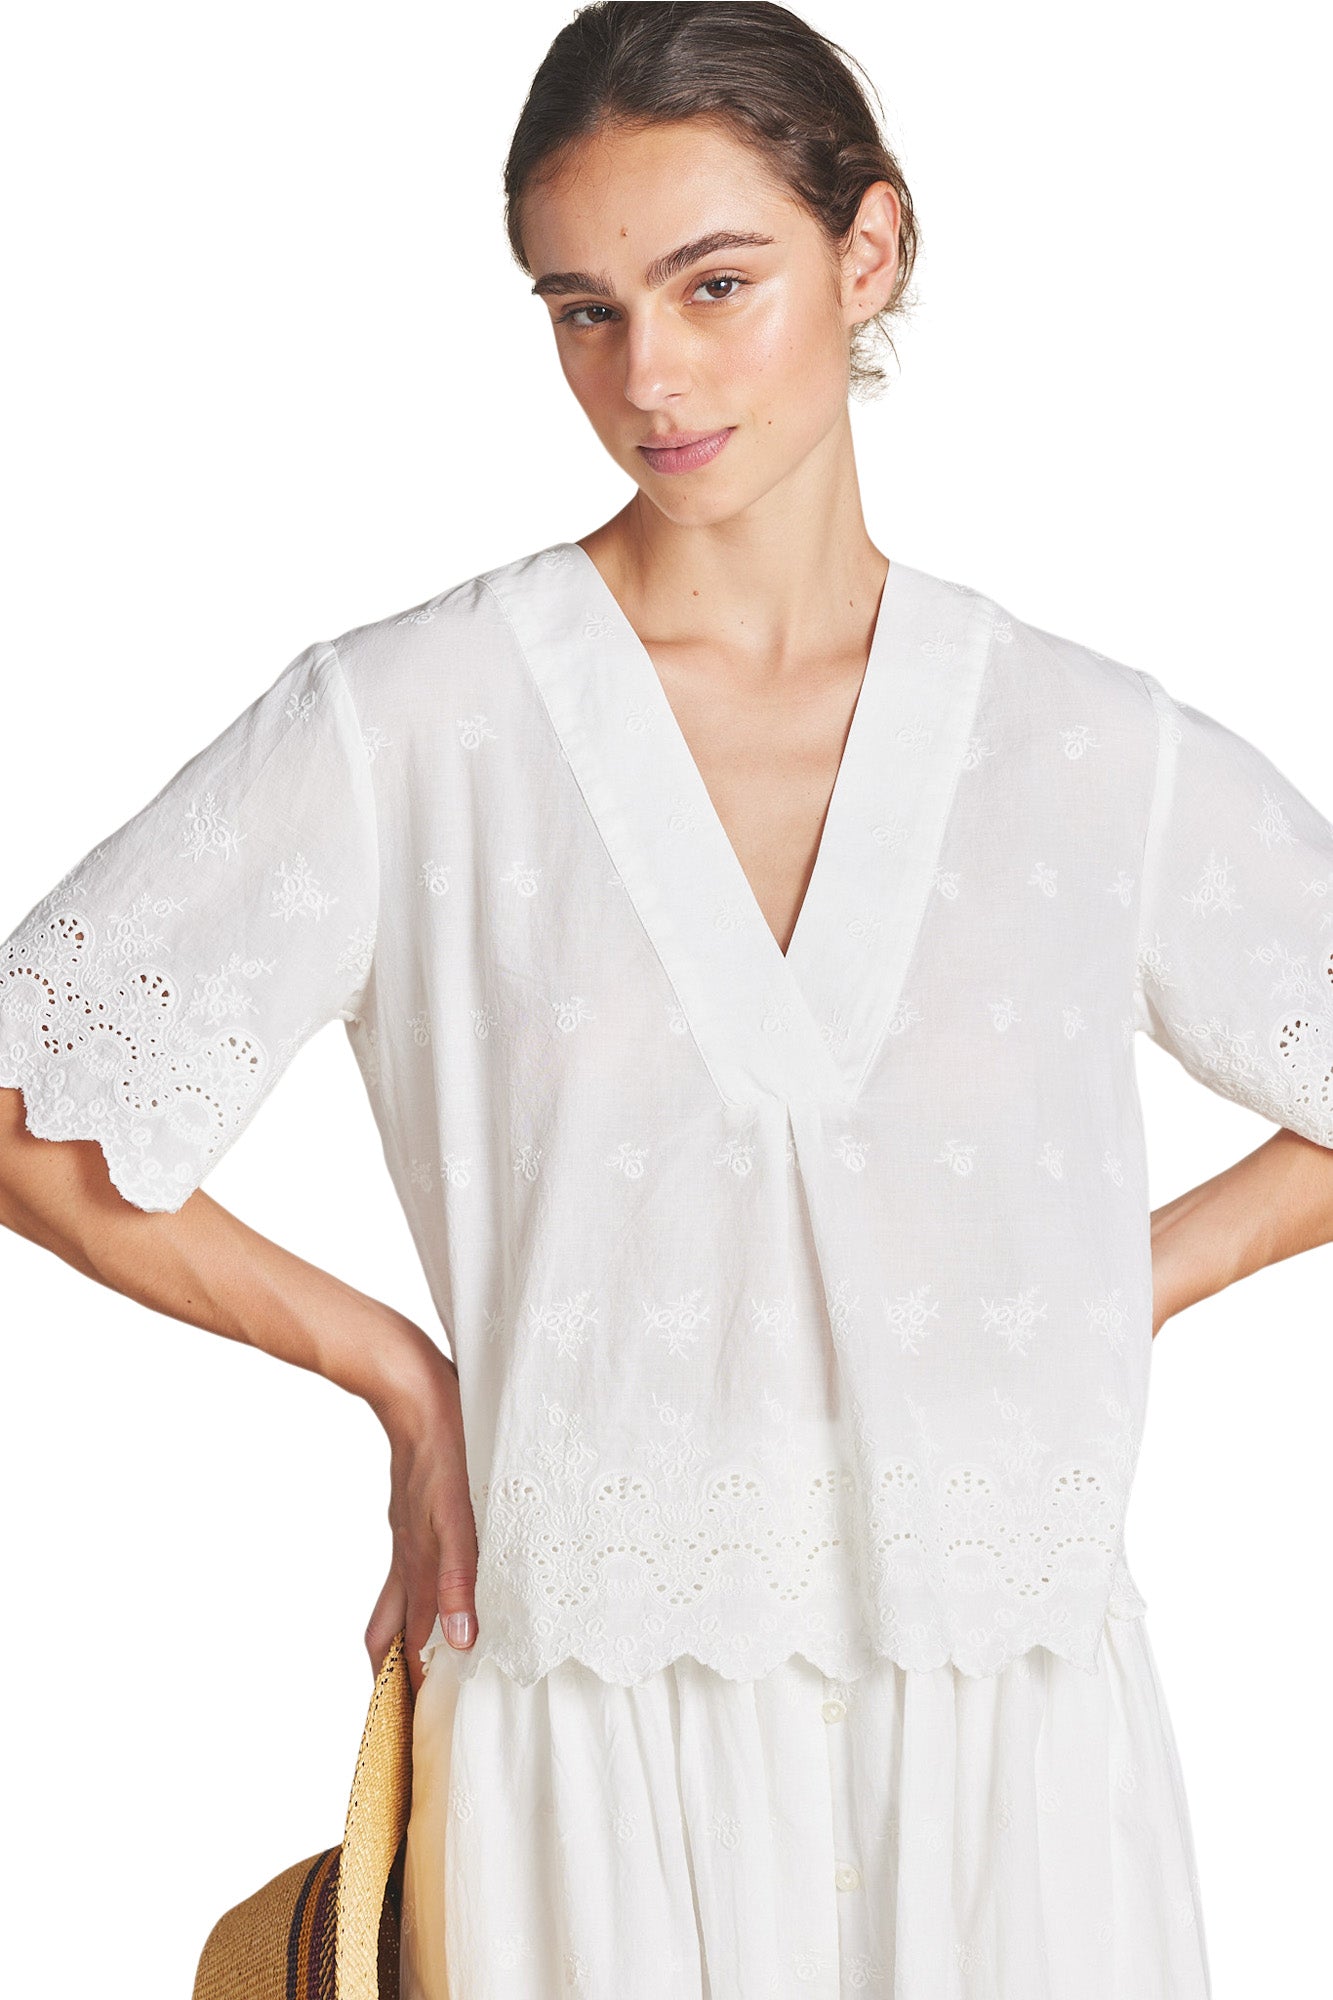 Trovata Birds of Paradis Neve Shirt in Broderie Anglaise